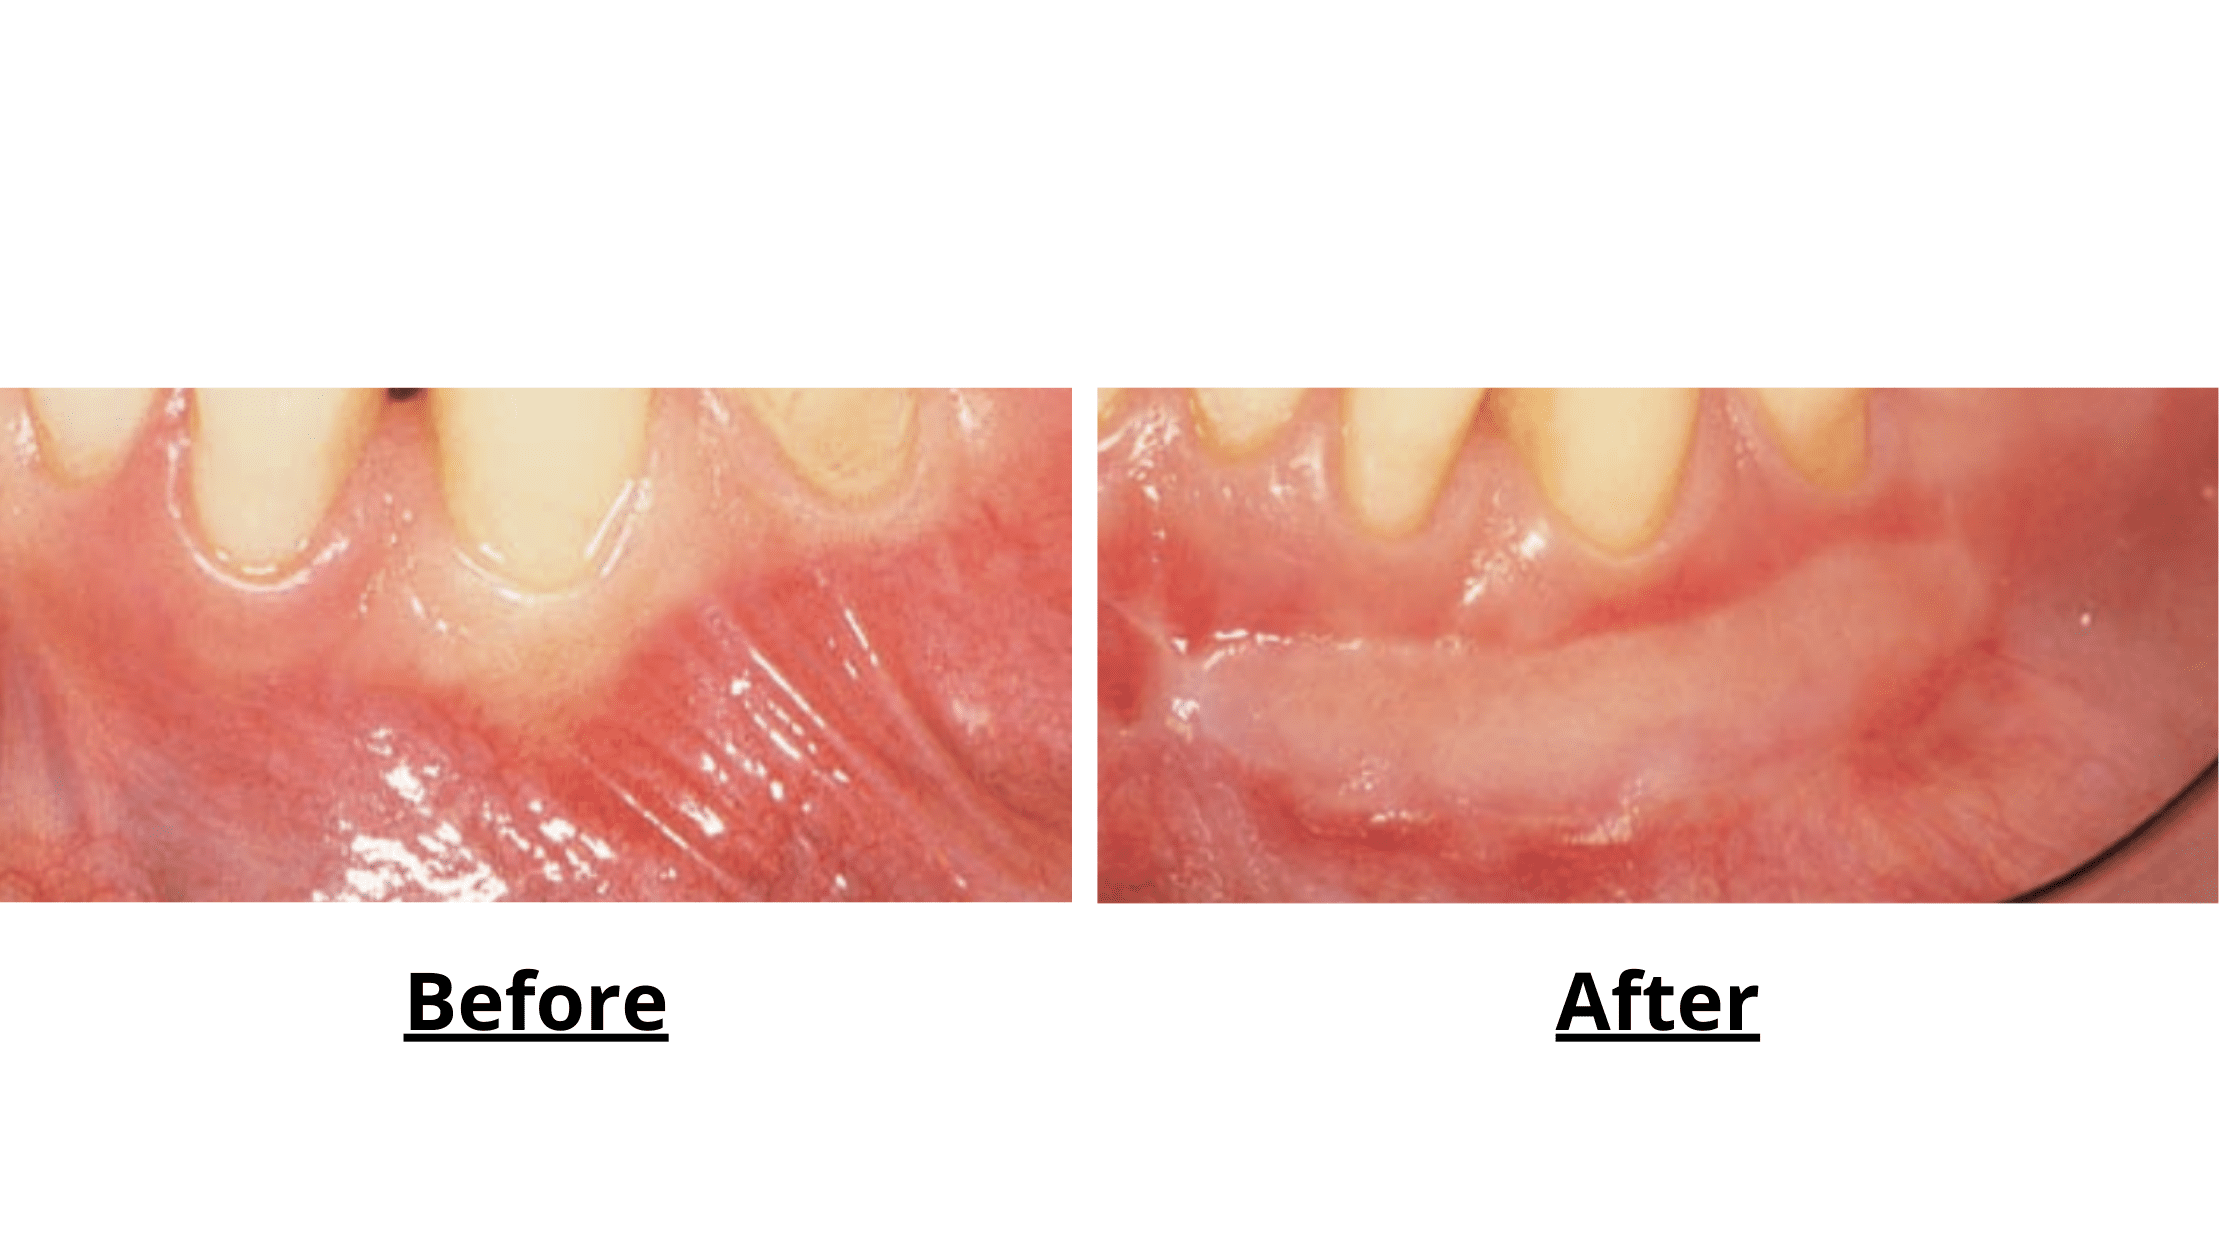 Free gingival graft turning pale pink after the healing and maturing